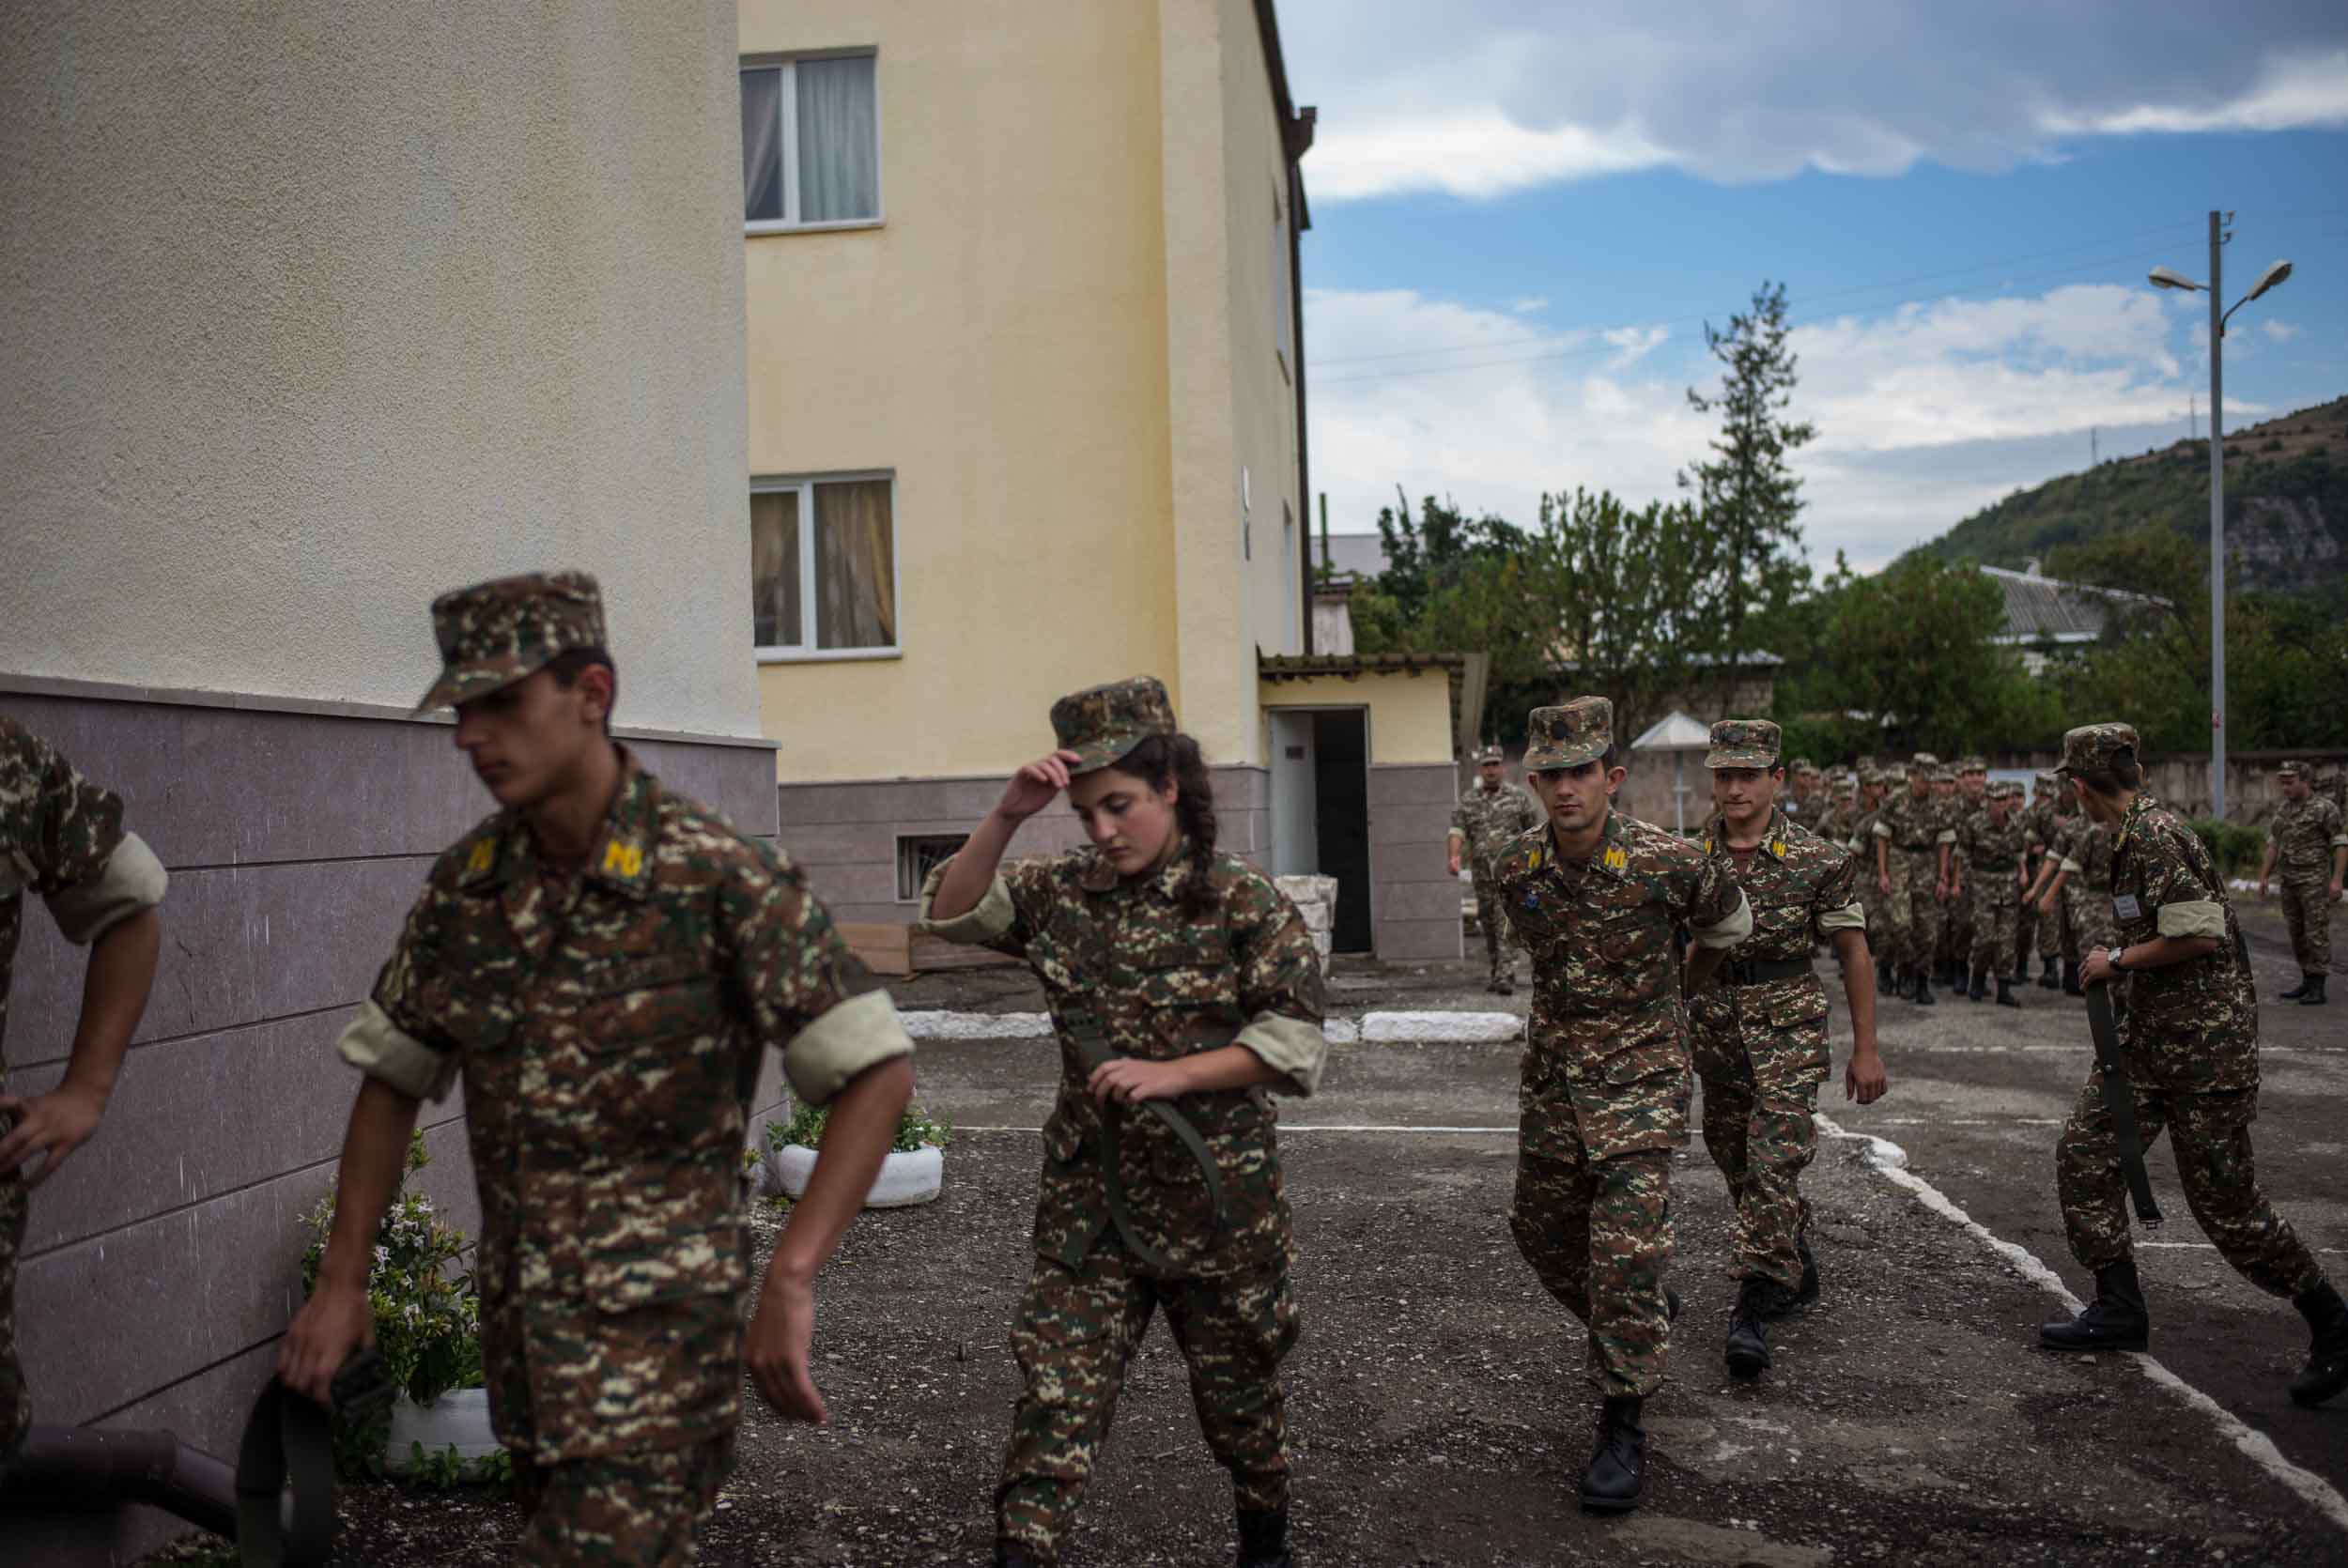  Students heading to lunch at the Military High School in Stepanakert,  Nagorny Karabakh. 